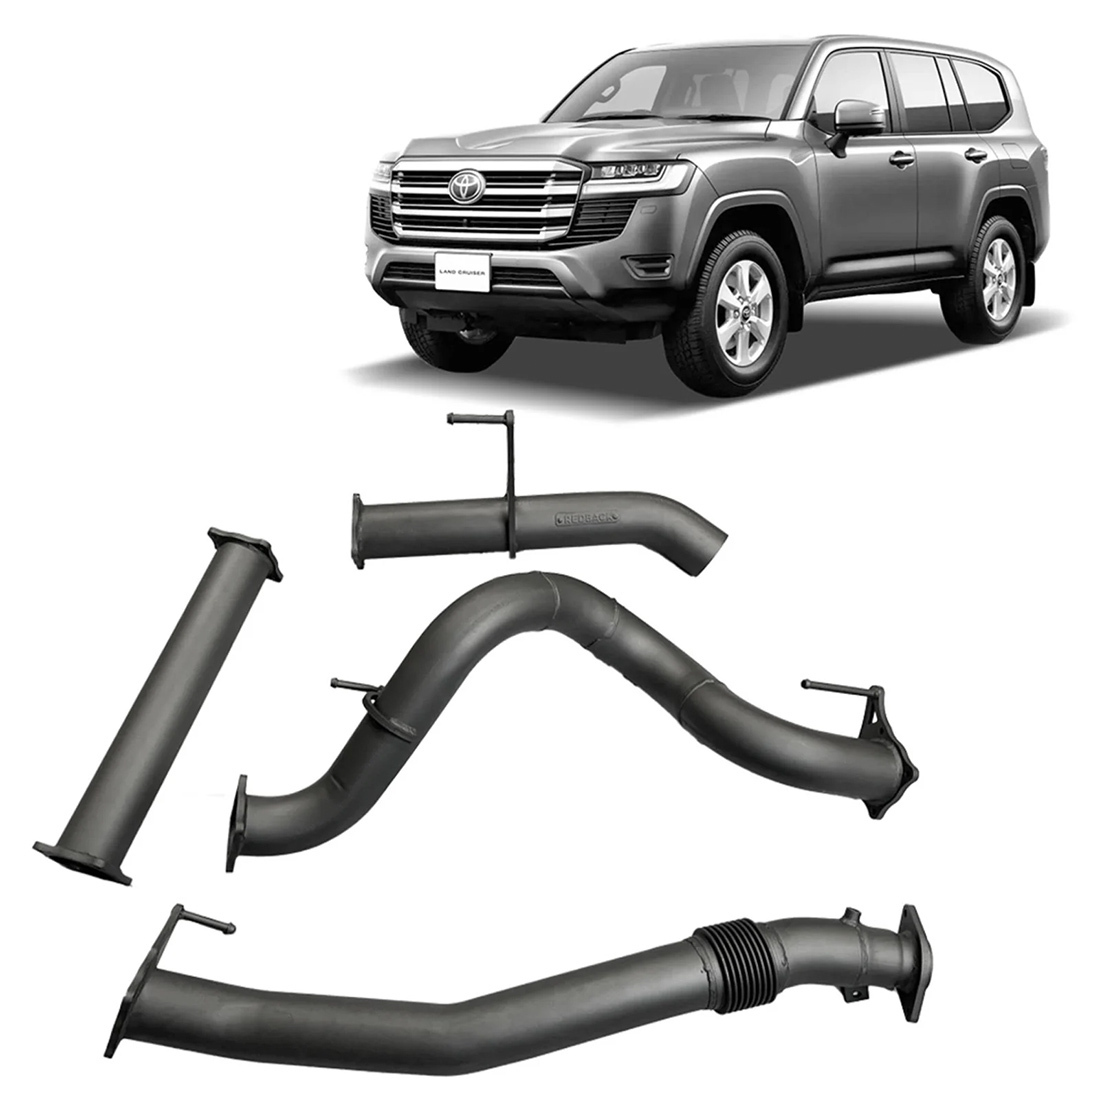 Redback Extreme Duty 3.5" Exhaust to suit Toyota Landcruiser 300 Series Wagon / SUV. image